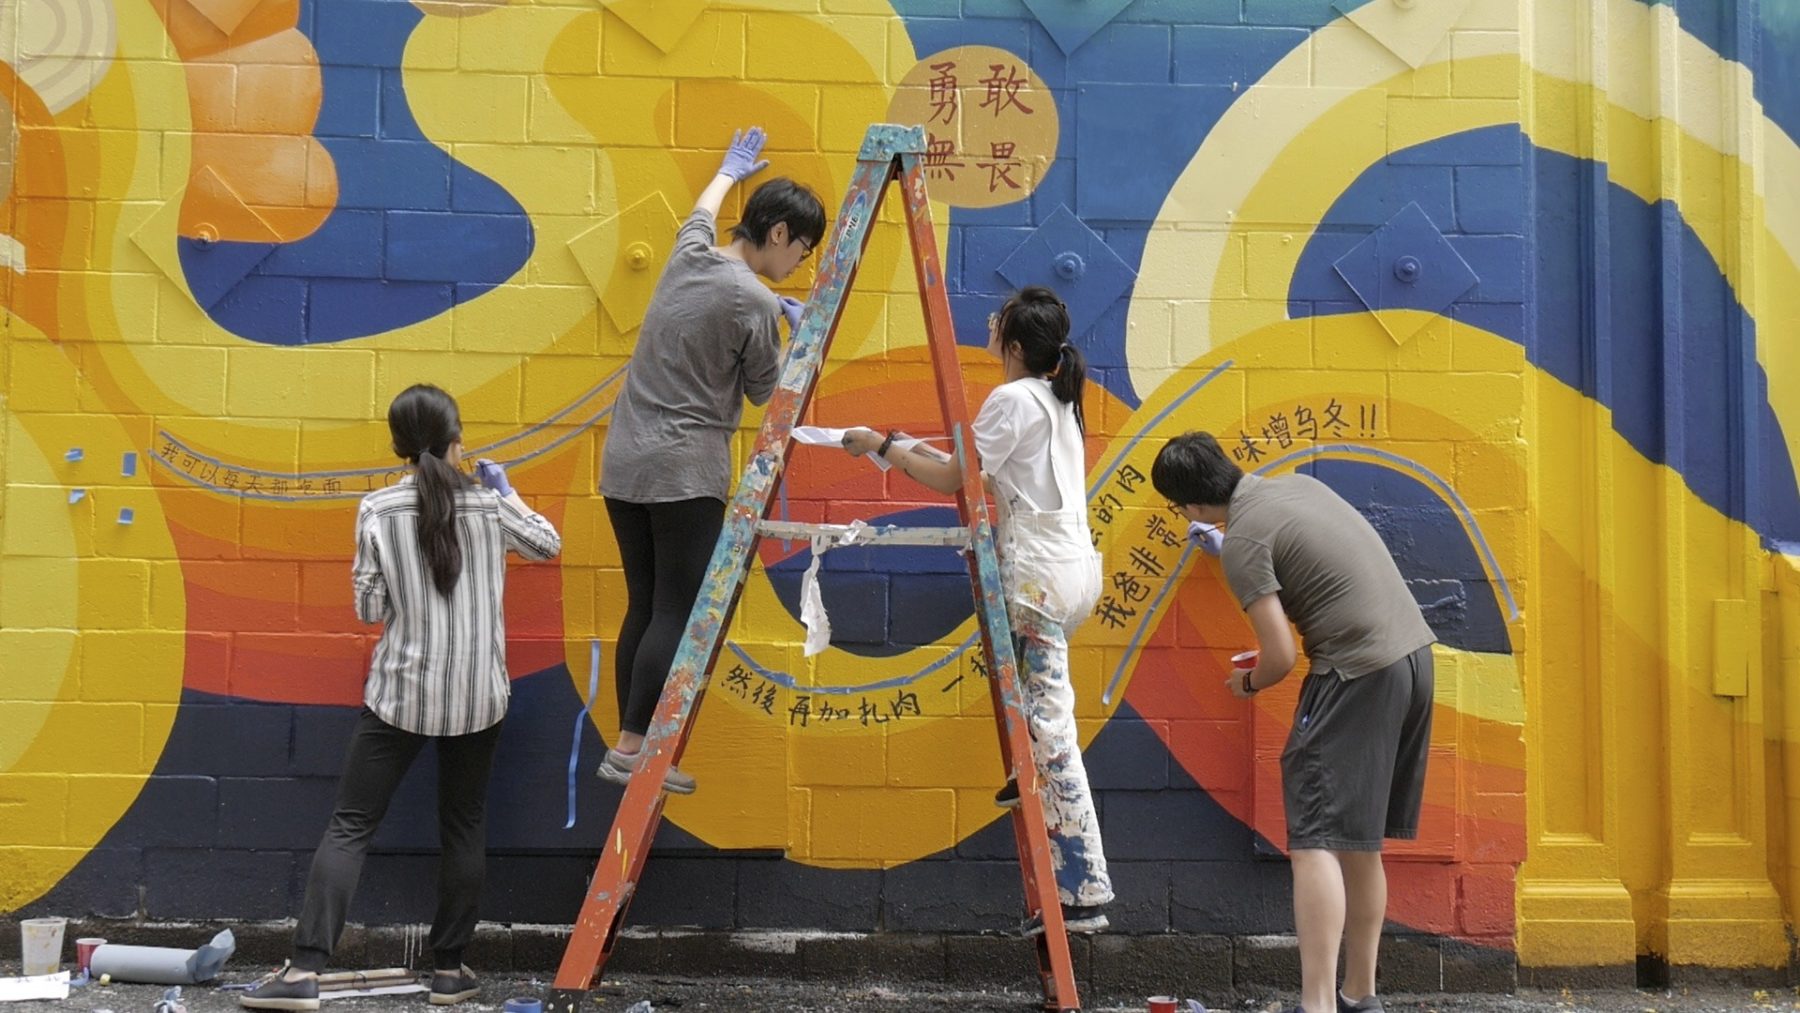 four people are shown standing on the ground and on a ladderpainting a mural